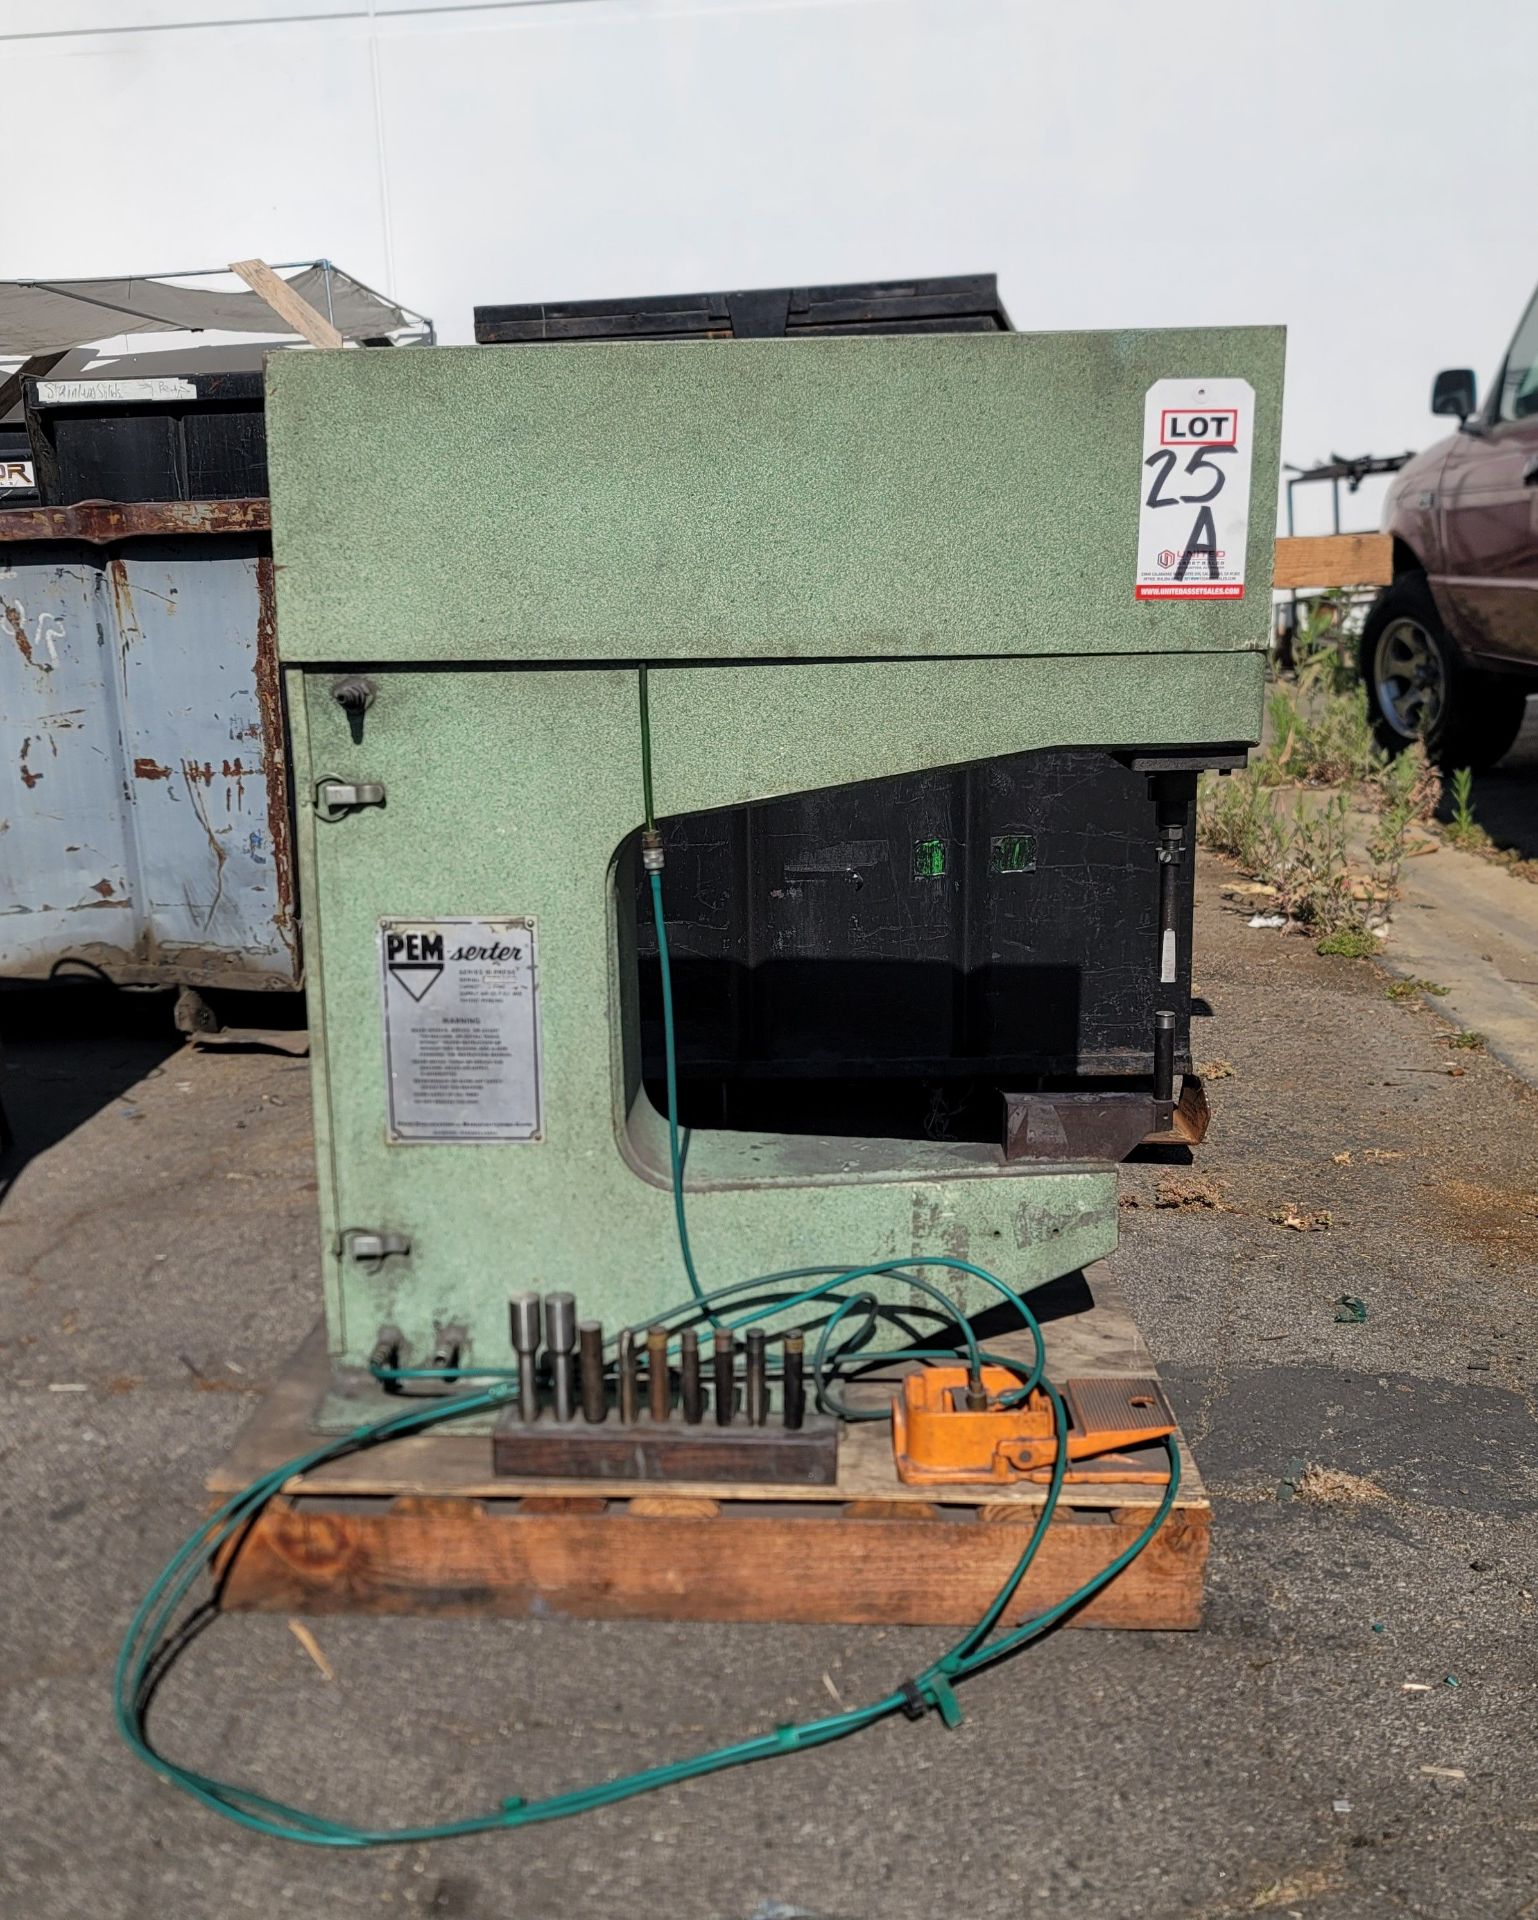 PEM-SERTER SERIES III INSERTION PRESS, CAPACITY: 3-TONS, S/N B3-063, OUT OF SERVICE/NEEDS WORK